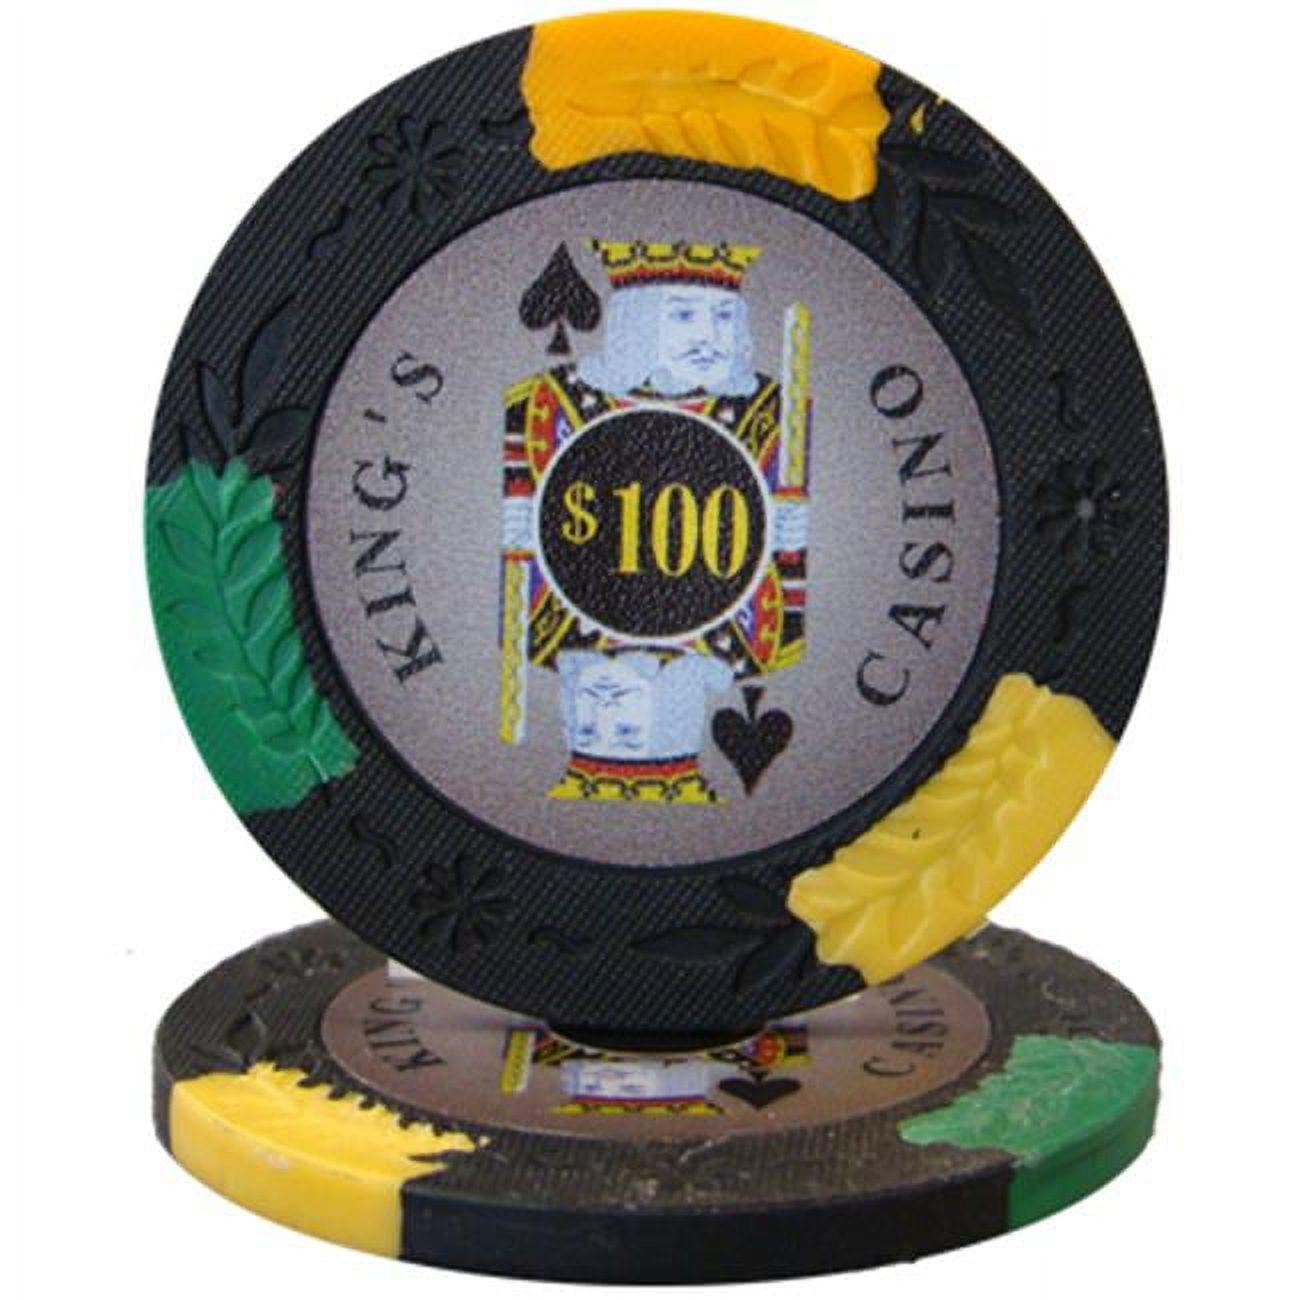 Cpkc-100-25 14 G Kings Casino Pro Clay - Dollar 100, Roll Of 25